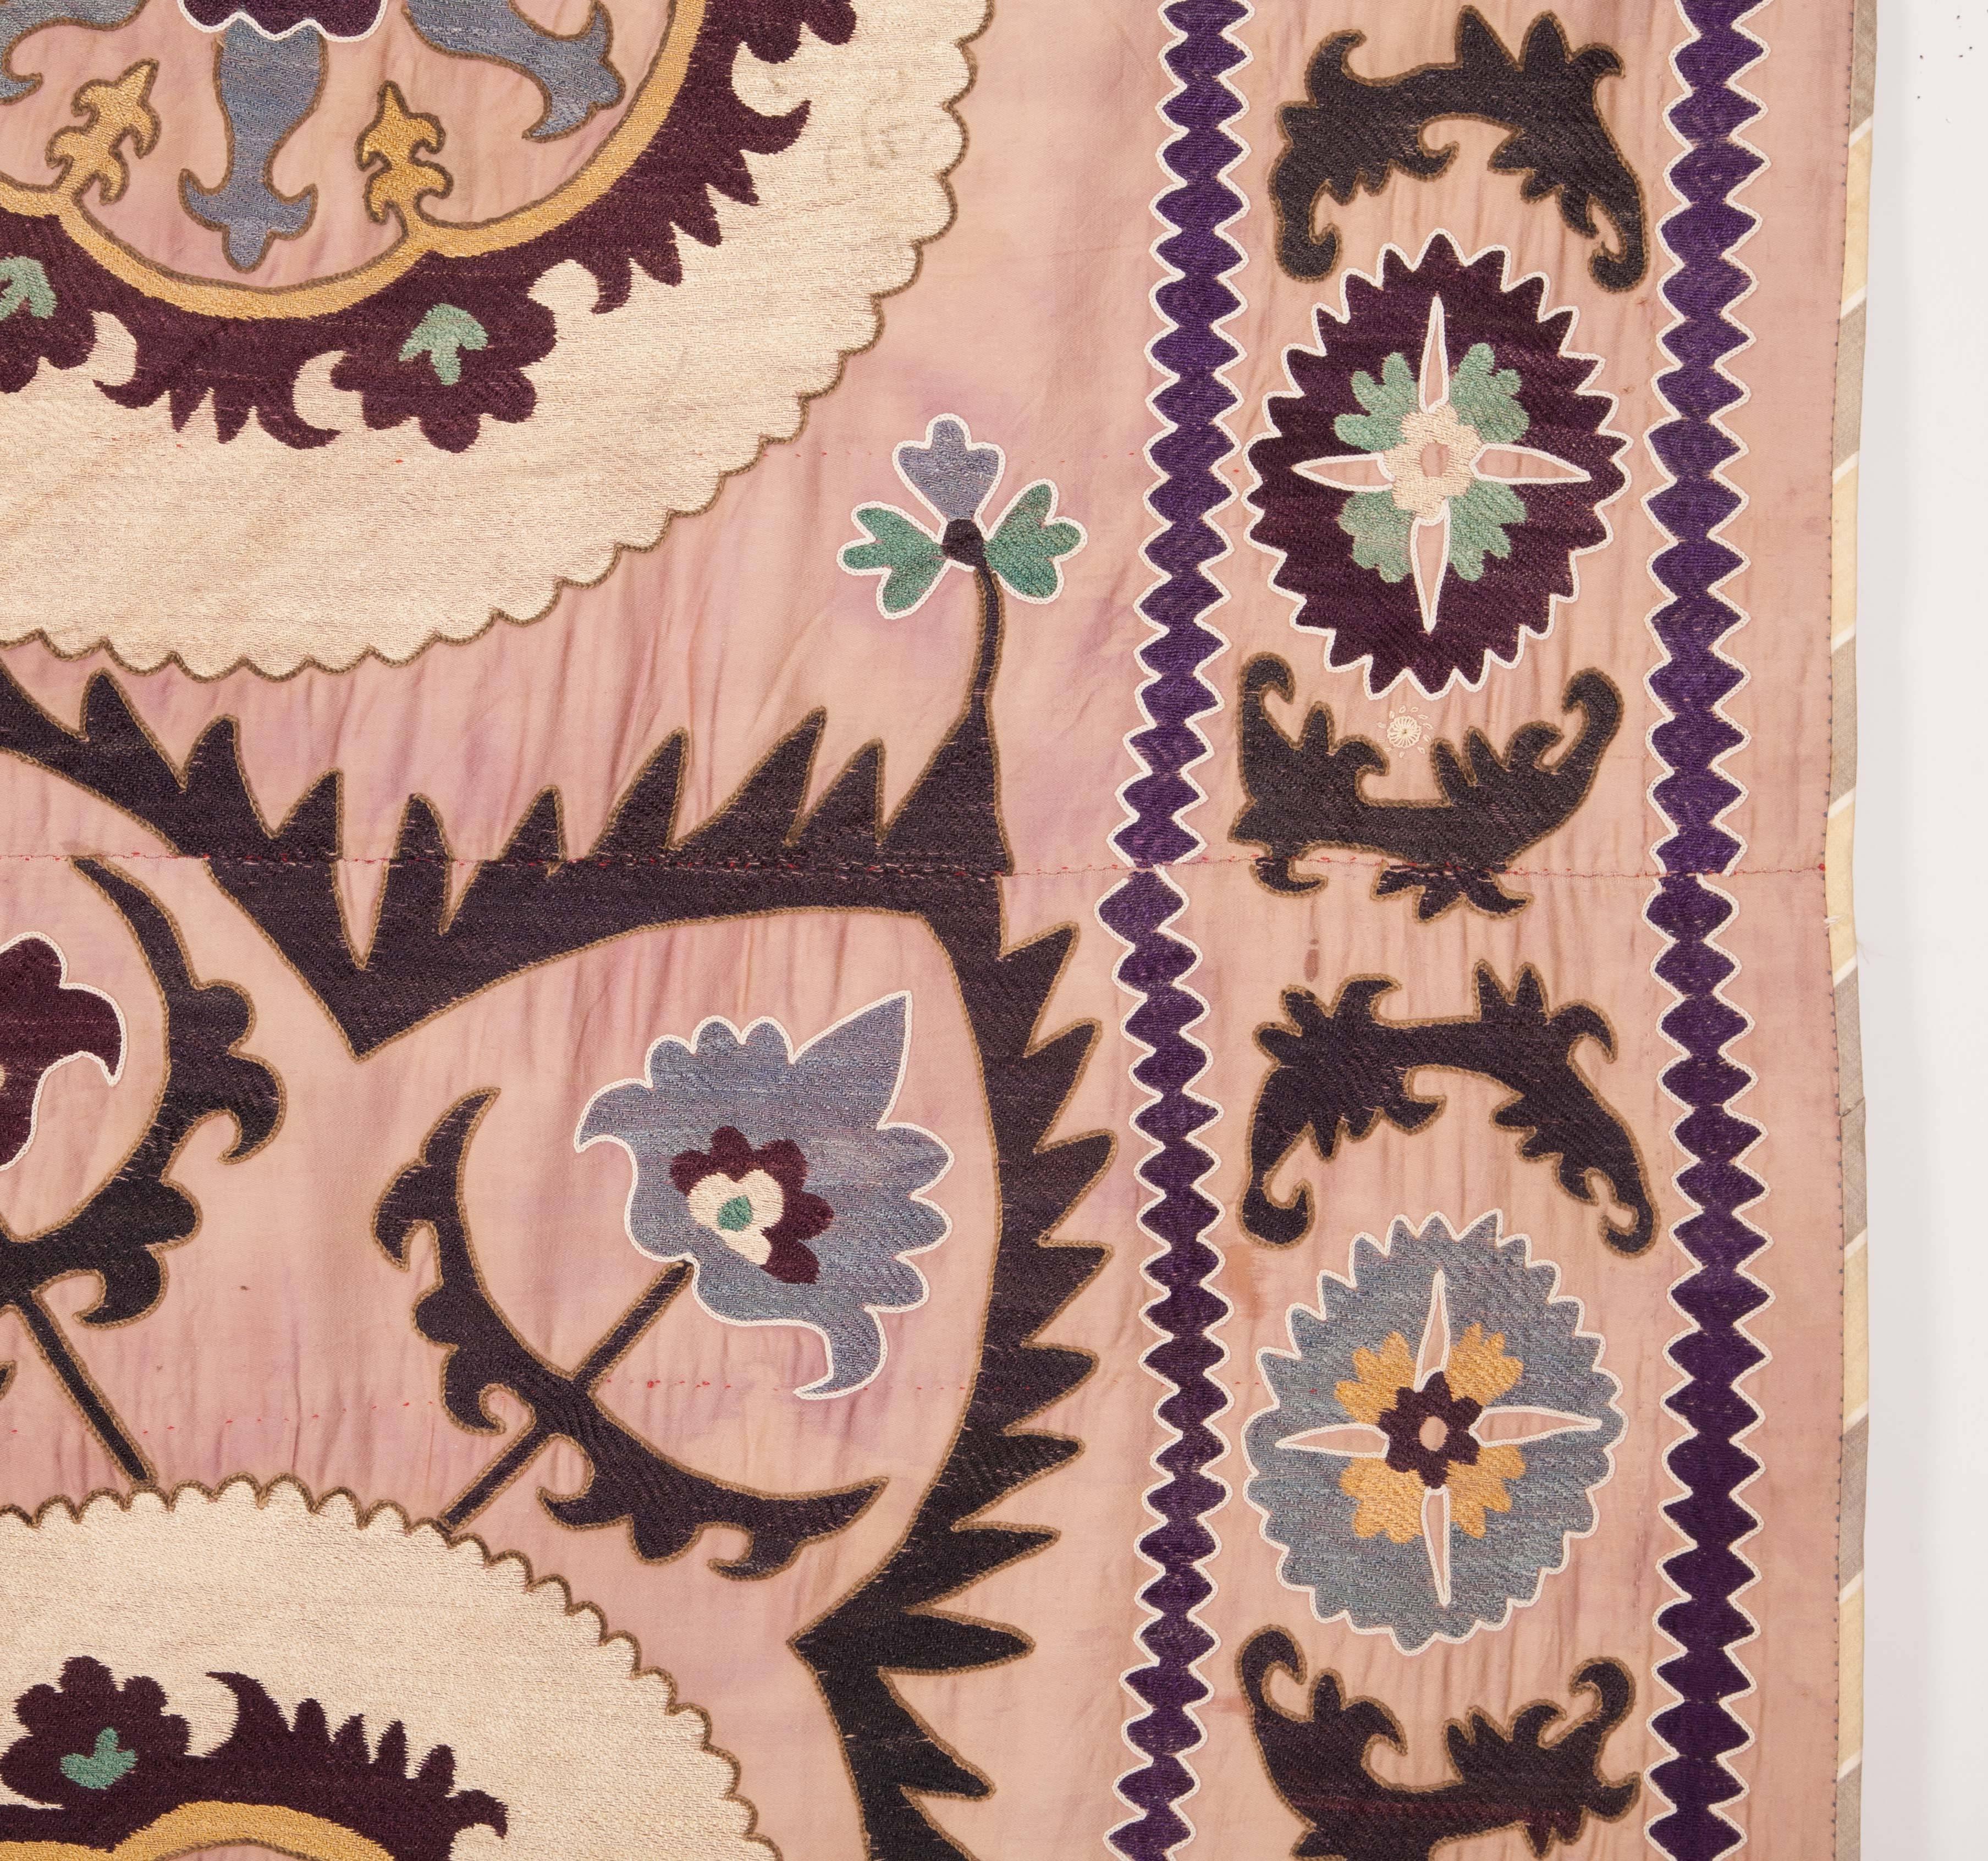 First Half of the 20th Century, Uzbek Suzani, Silk Embroidery on a Cotton Ground 1